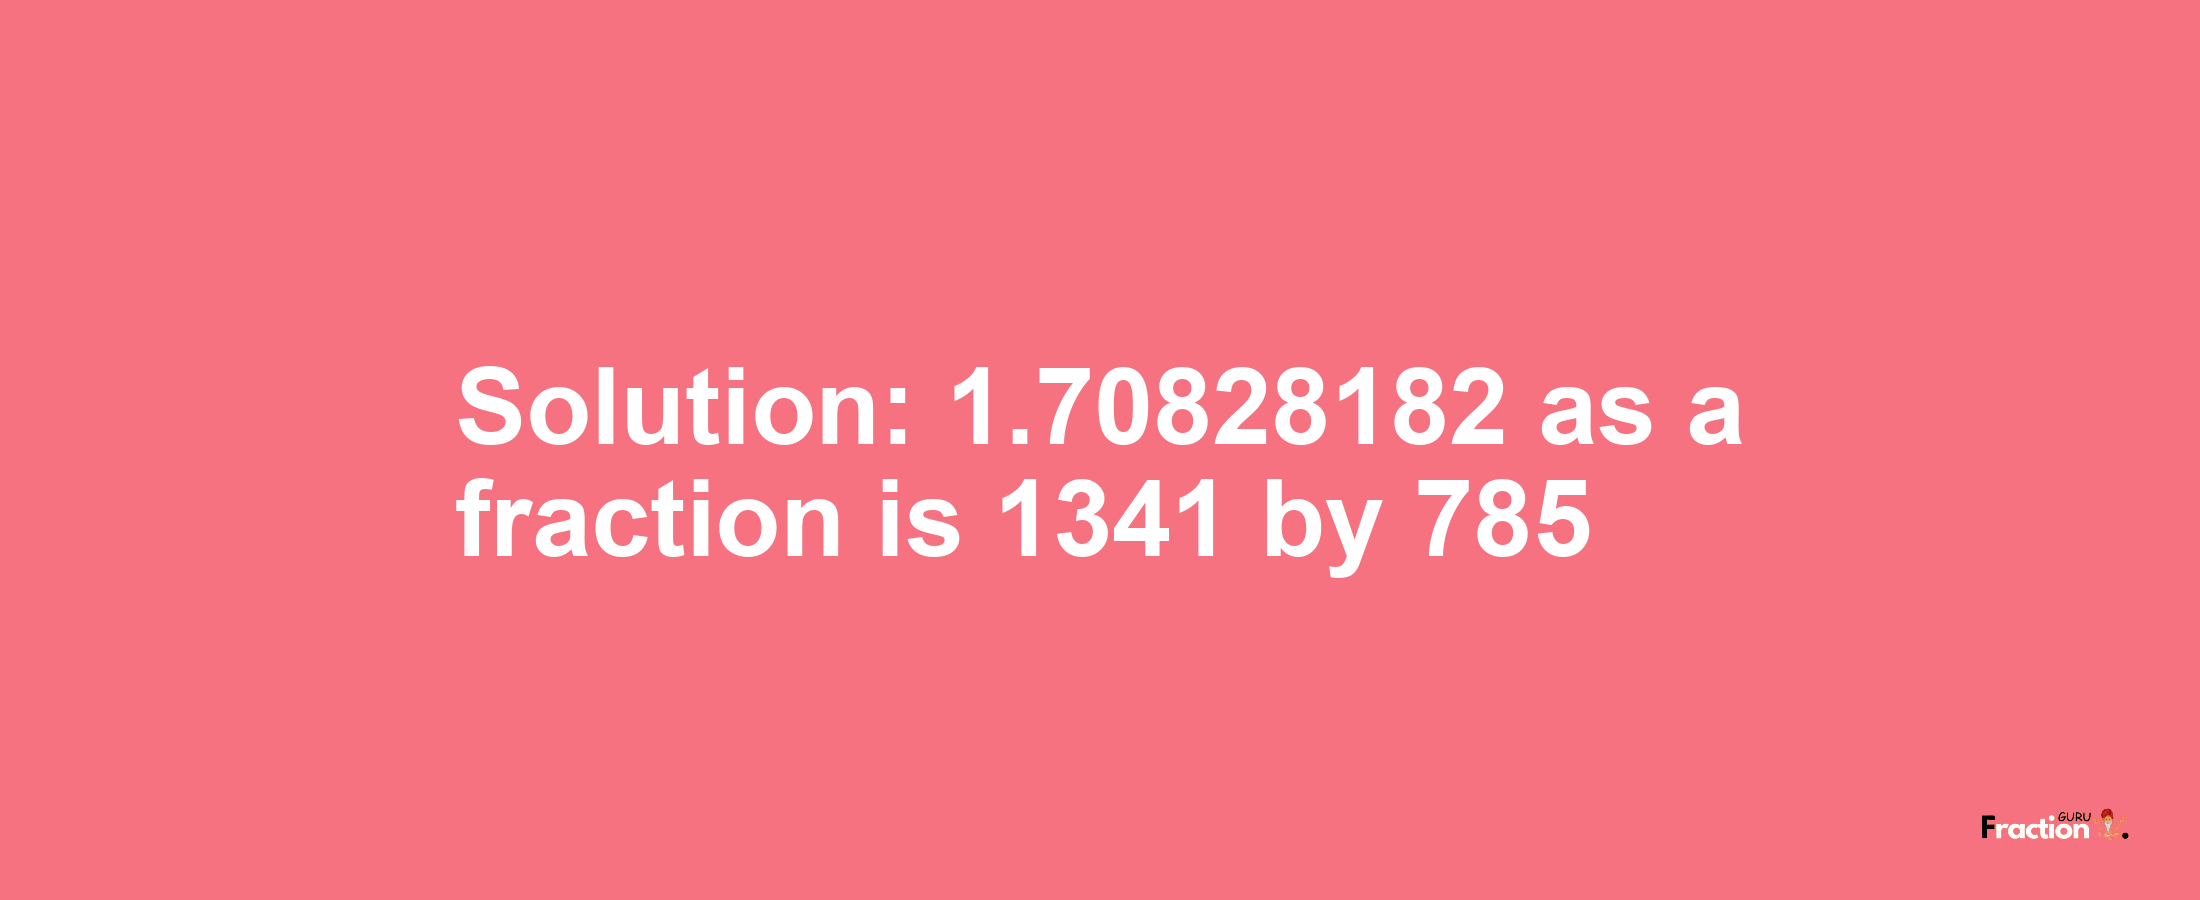 Solution:1.70828182 as a fraction is 1341/785